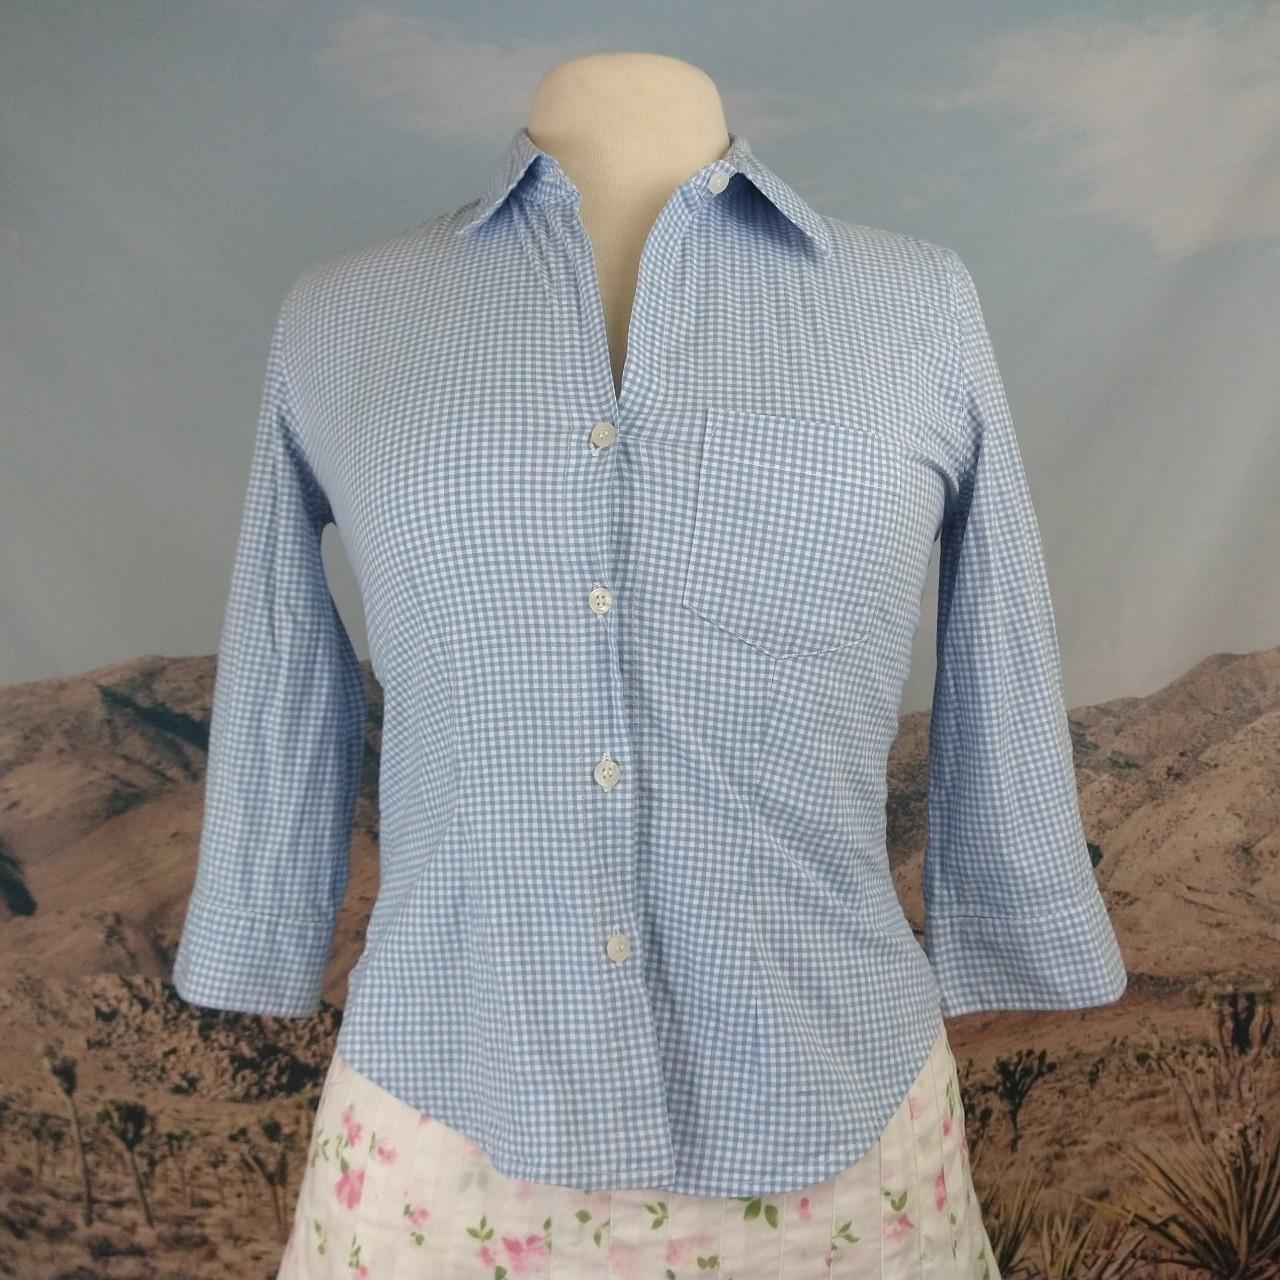 Women's White and Blue Blouse | Depop